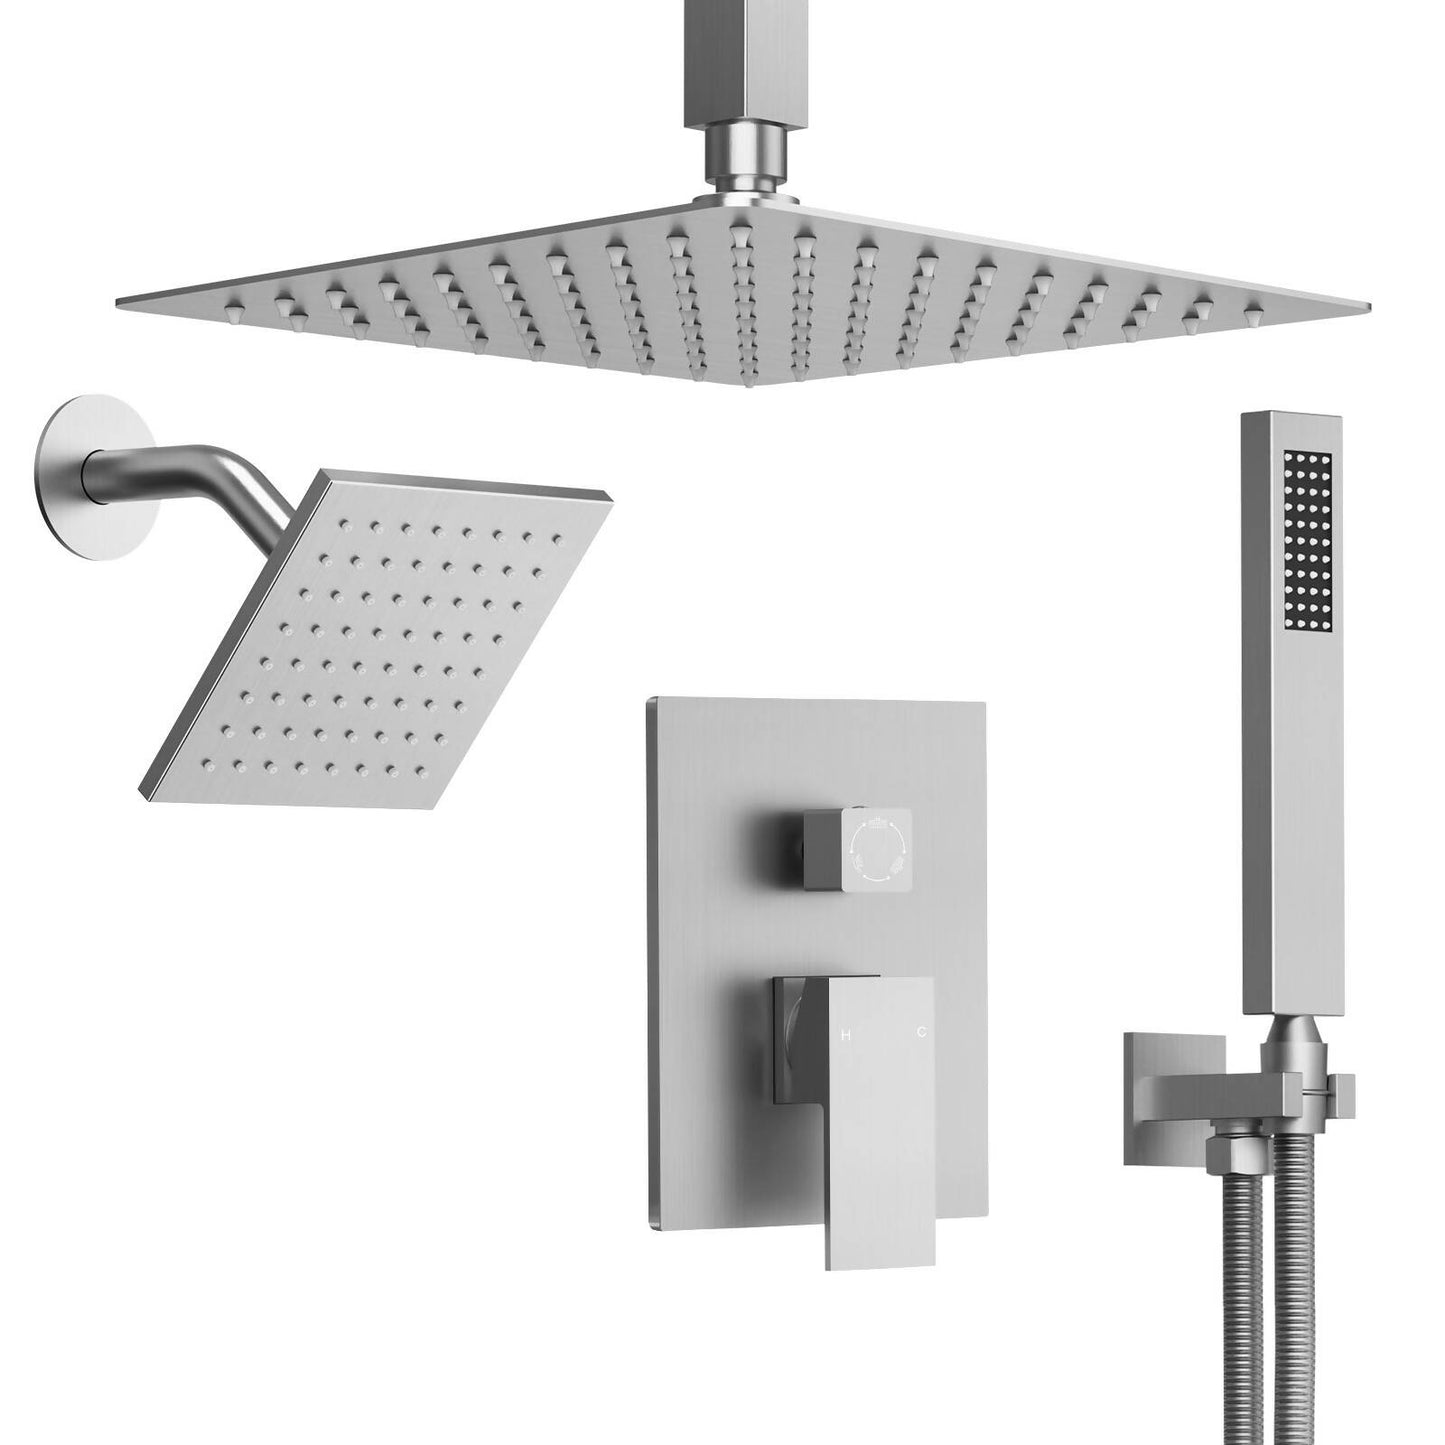 DualJetSpa 10" High-Pressure Rainfall Shower Faucet, Celling Mount, Rough in-Valve, 2.5 GPM